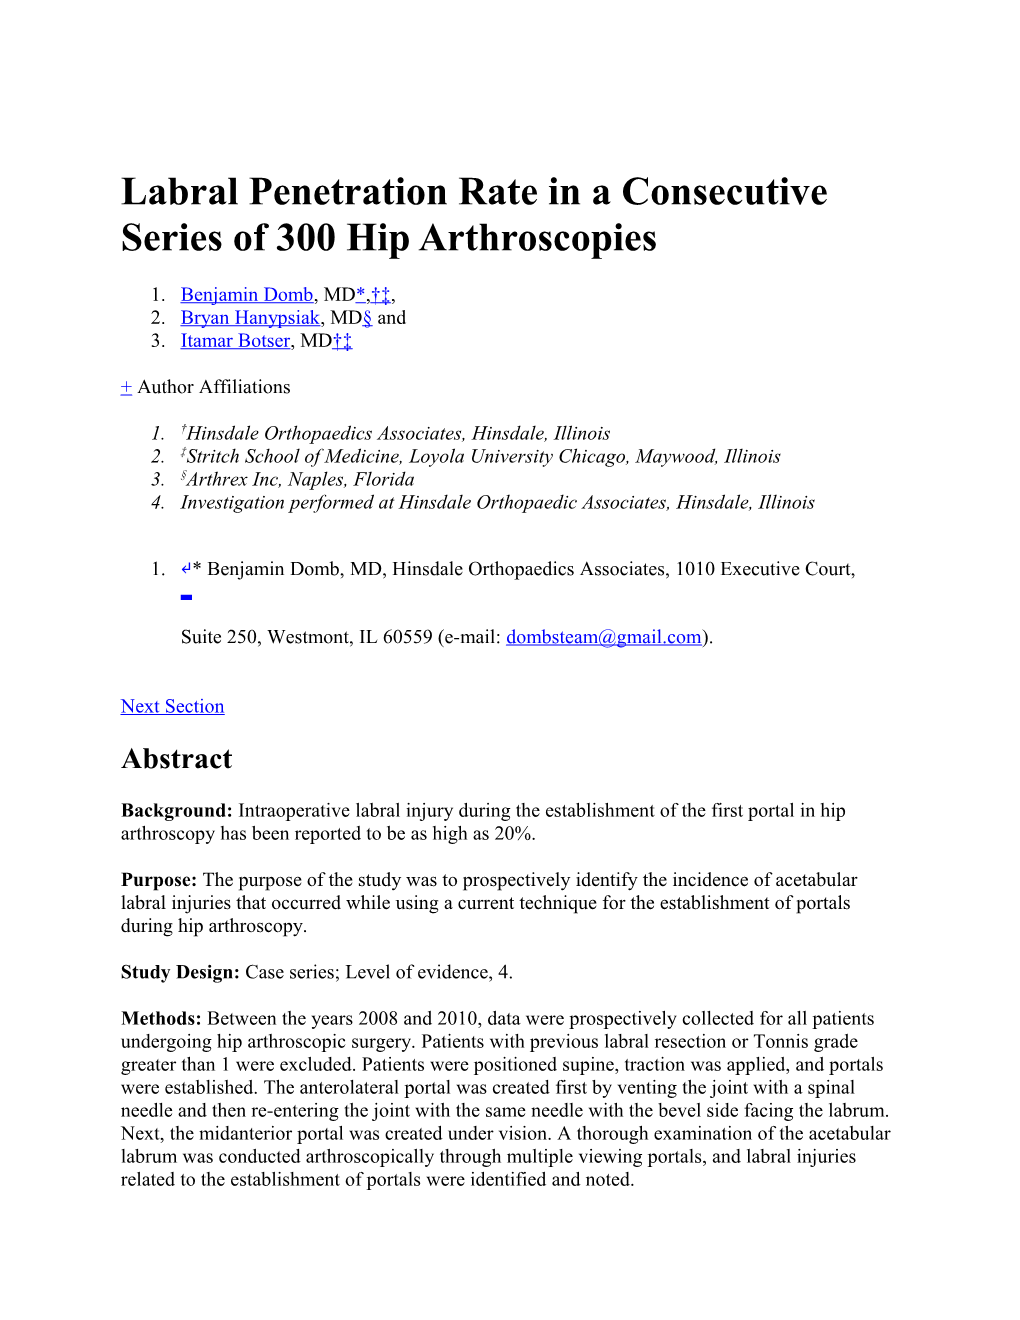 Labral Penetration Rate in a Consecutive Series of 300 Hip Arthroscopies